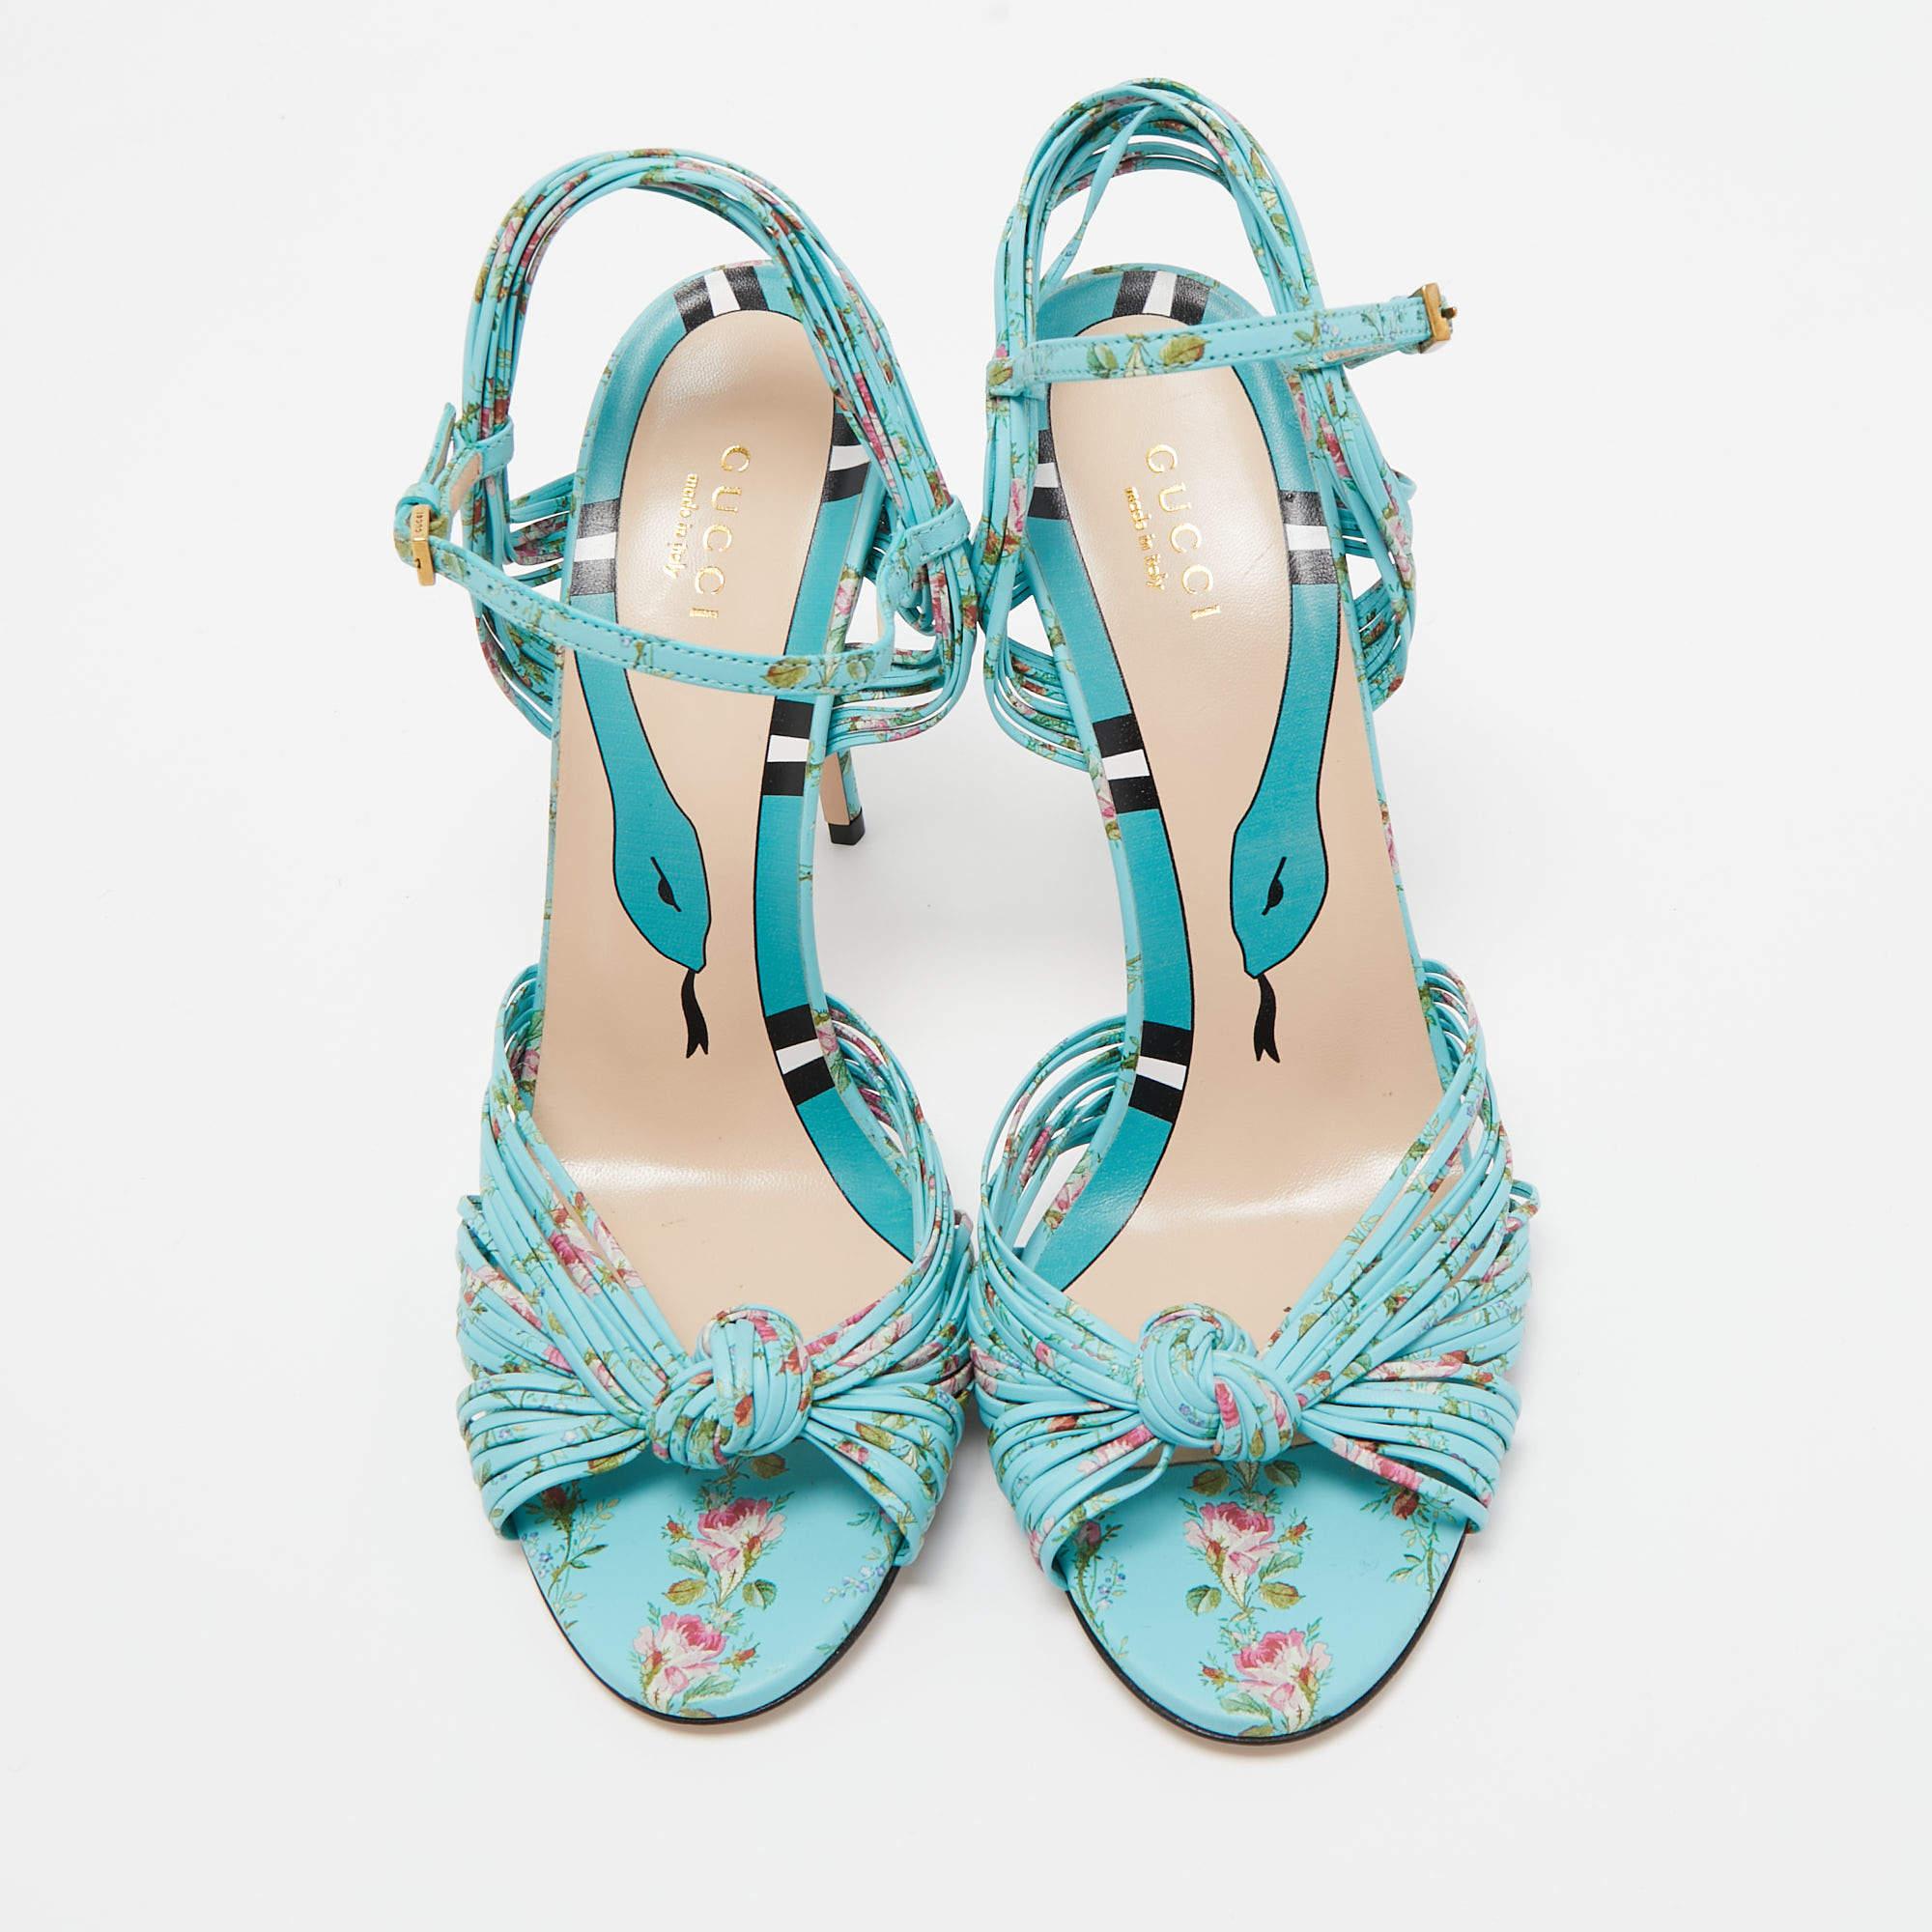 The Gucci Allie sandals are a stunning blend of luxury and style. These open-toe sandals feature a vibrant blue leather exterior adorned with a delicate floral print, a high heel, and an ankle strap for a secure and elegant fit. Perfect for adding a